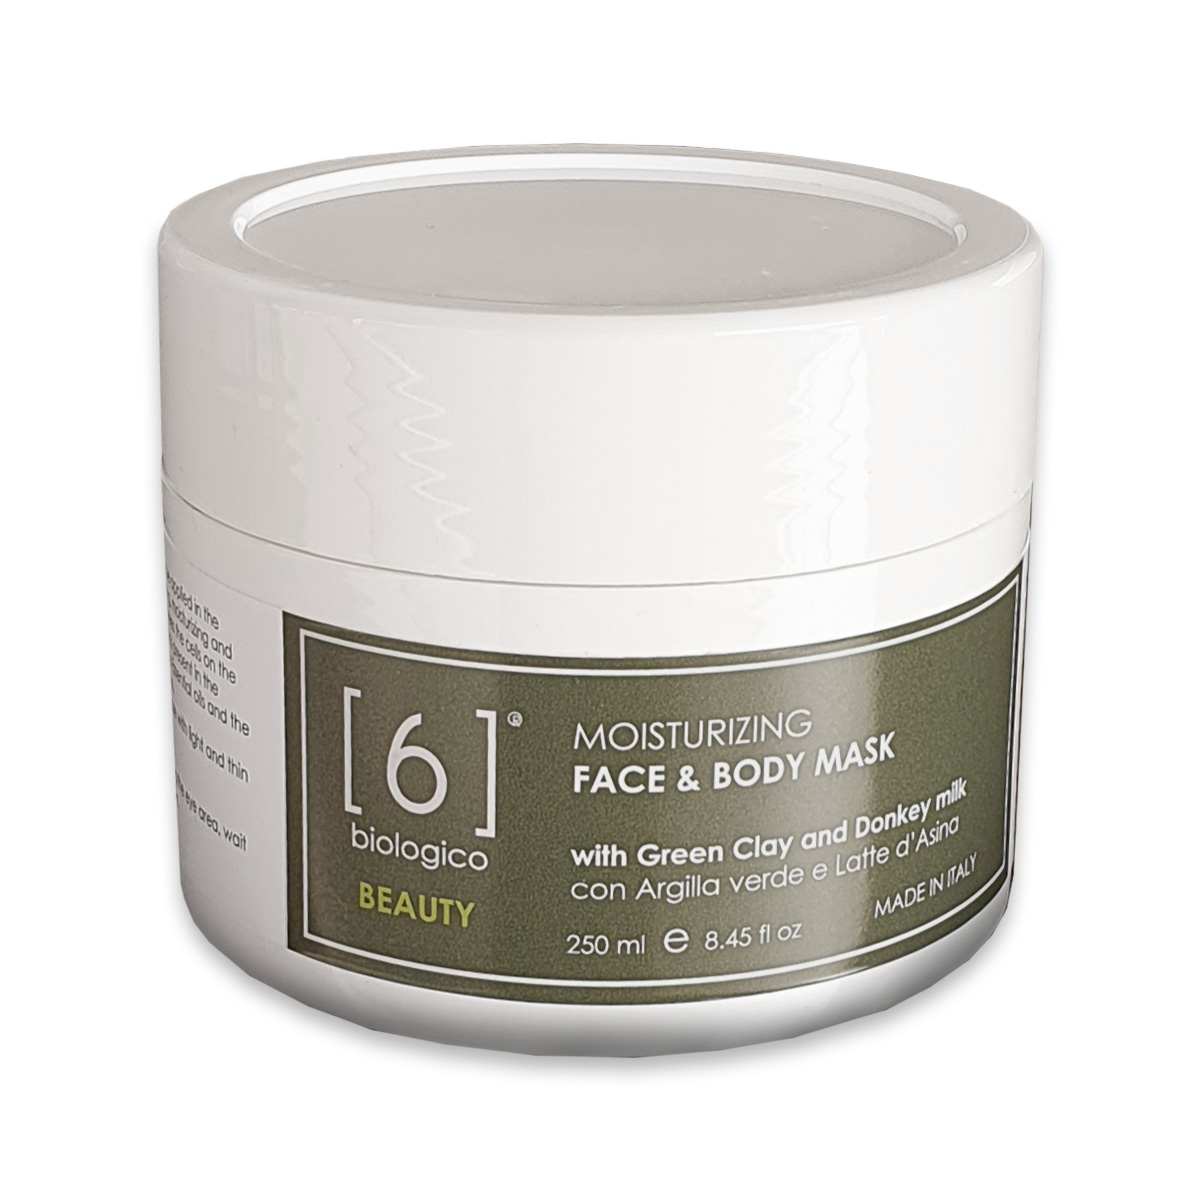 MOISTURIZING FACE AND BODY MASK  -  with Green Clay and Donkey milk 